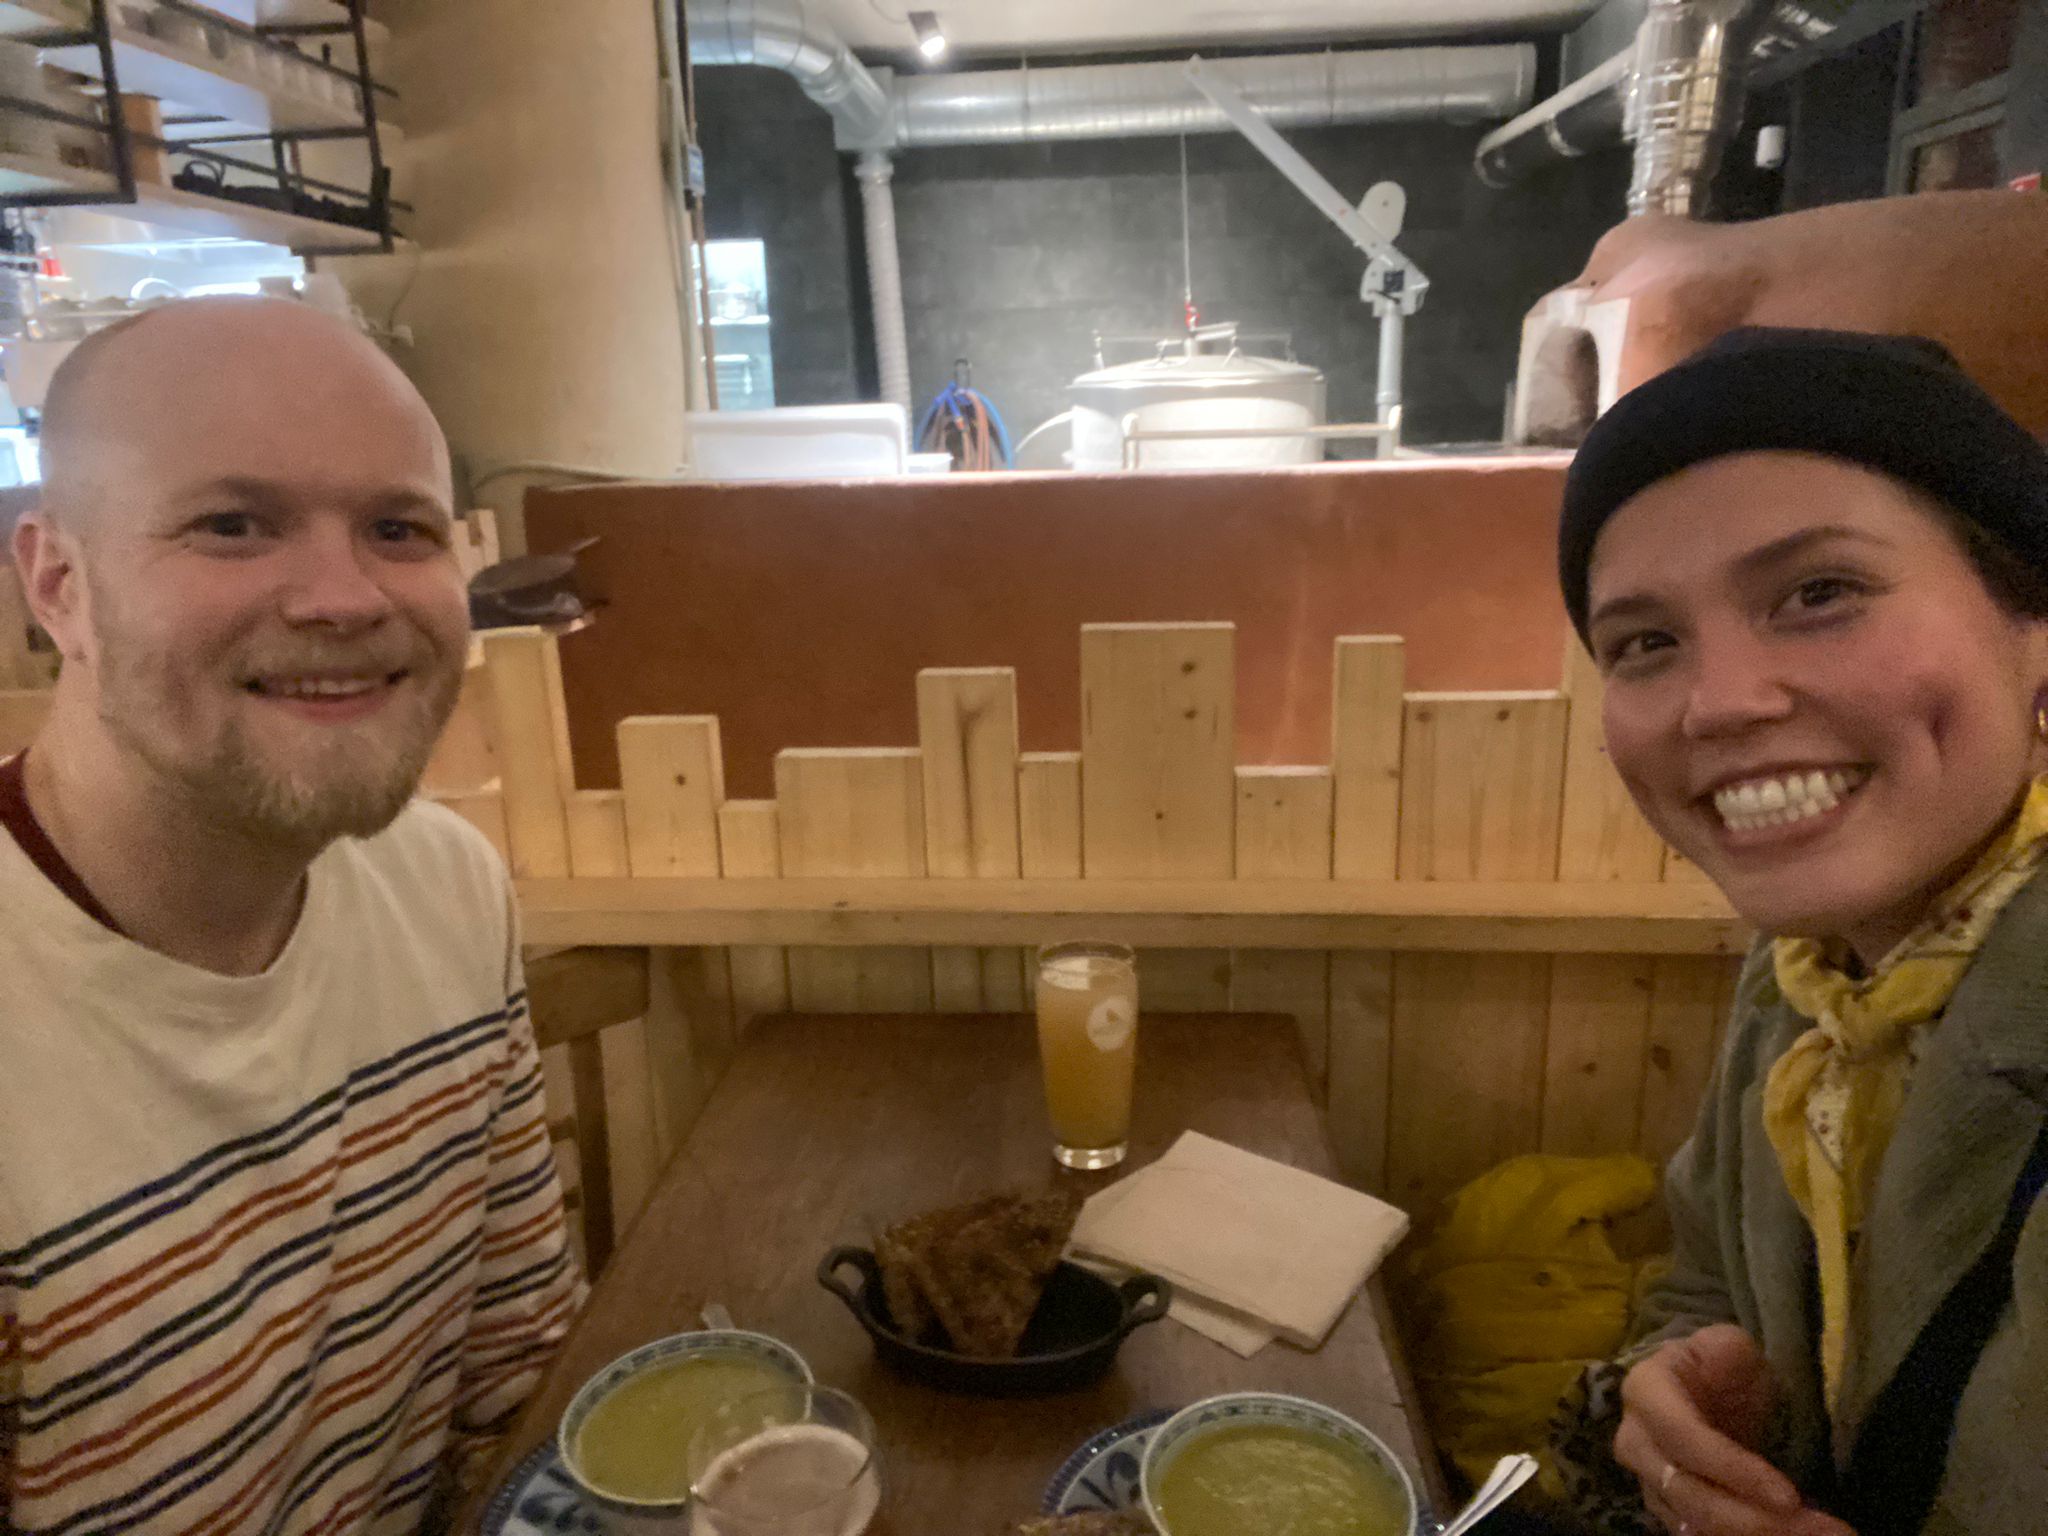 Two people sat in a restaurant taking a self-portrait. On the table is fresh, handmade bread, soup and glasses of beer and cola. On the left is a man in his 30s with very short blonde hair, a beard and a light coloured top with blue-and-orange, horizontal stripes. On the right is a young woman, who is taking the picture, wearing a green coat, black hat and yellow neck-scarf. In the rear of the room, is a large pizza oven and brewing equipment